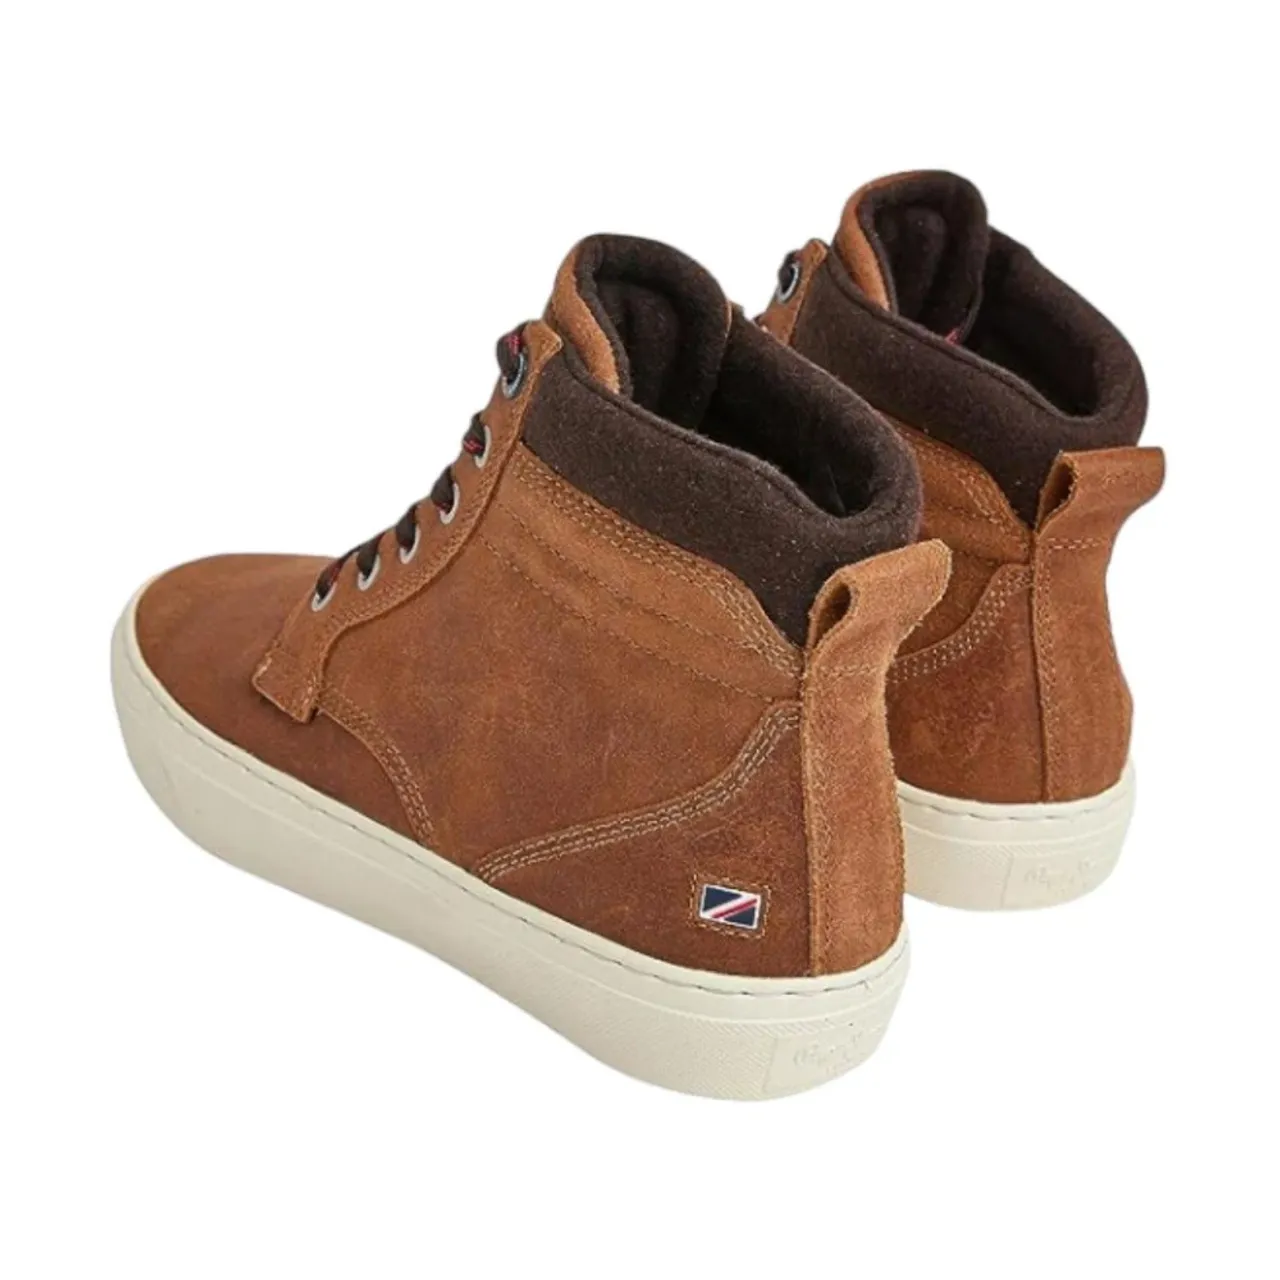 Pepe Jeans , Lace-up Boots ,Brown male, Sizes: